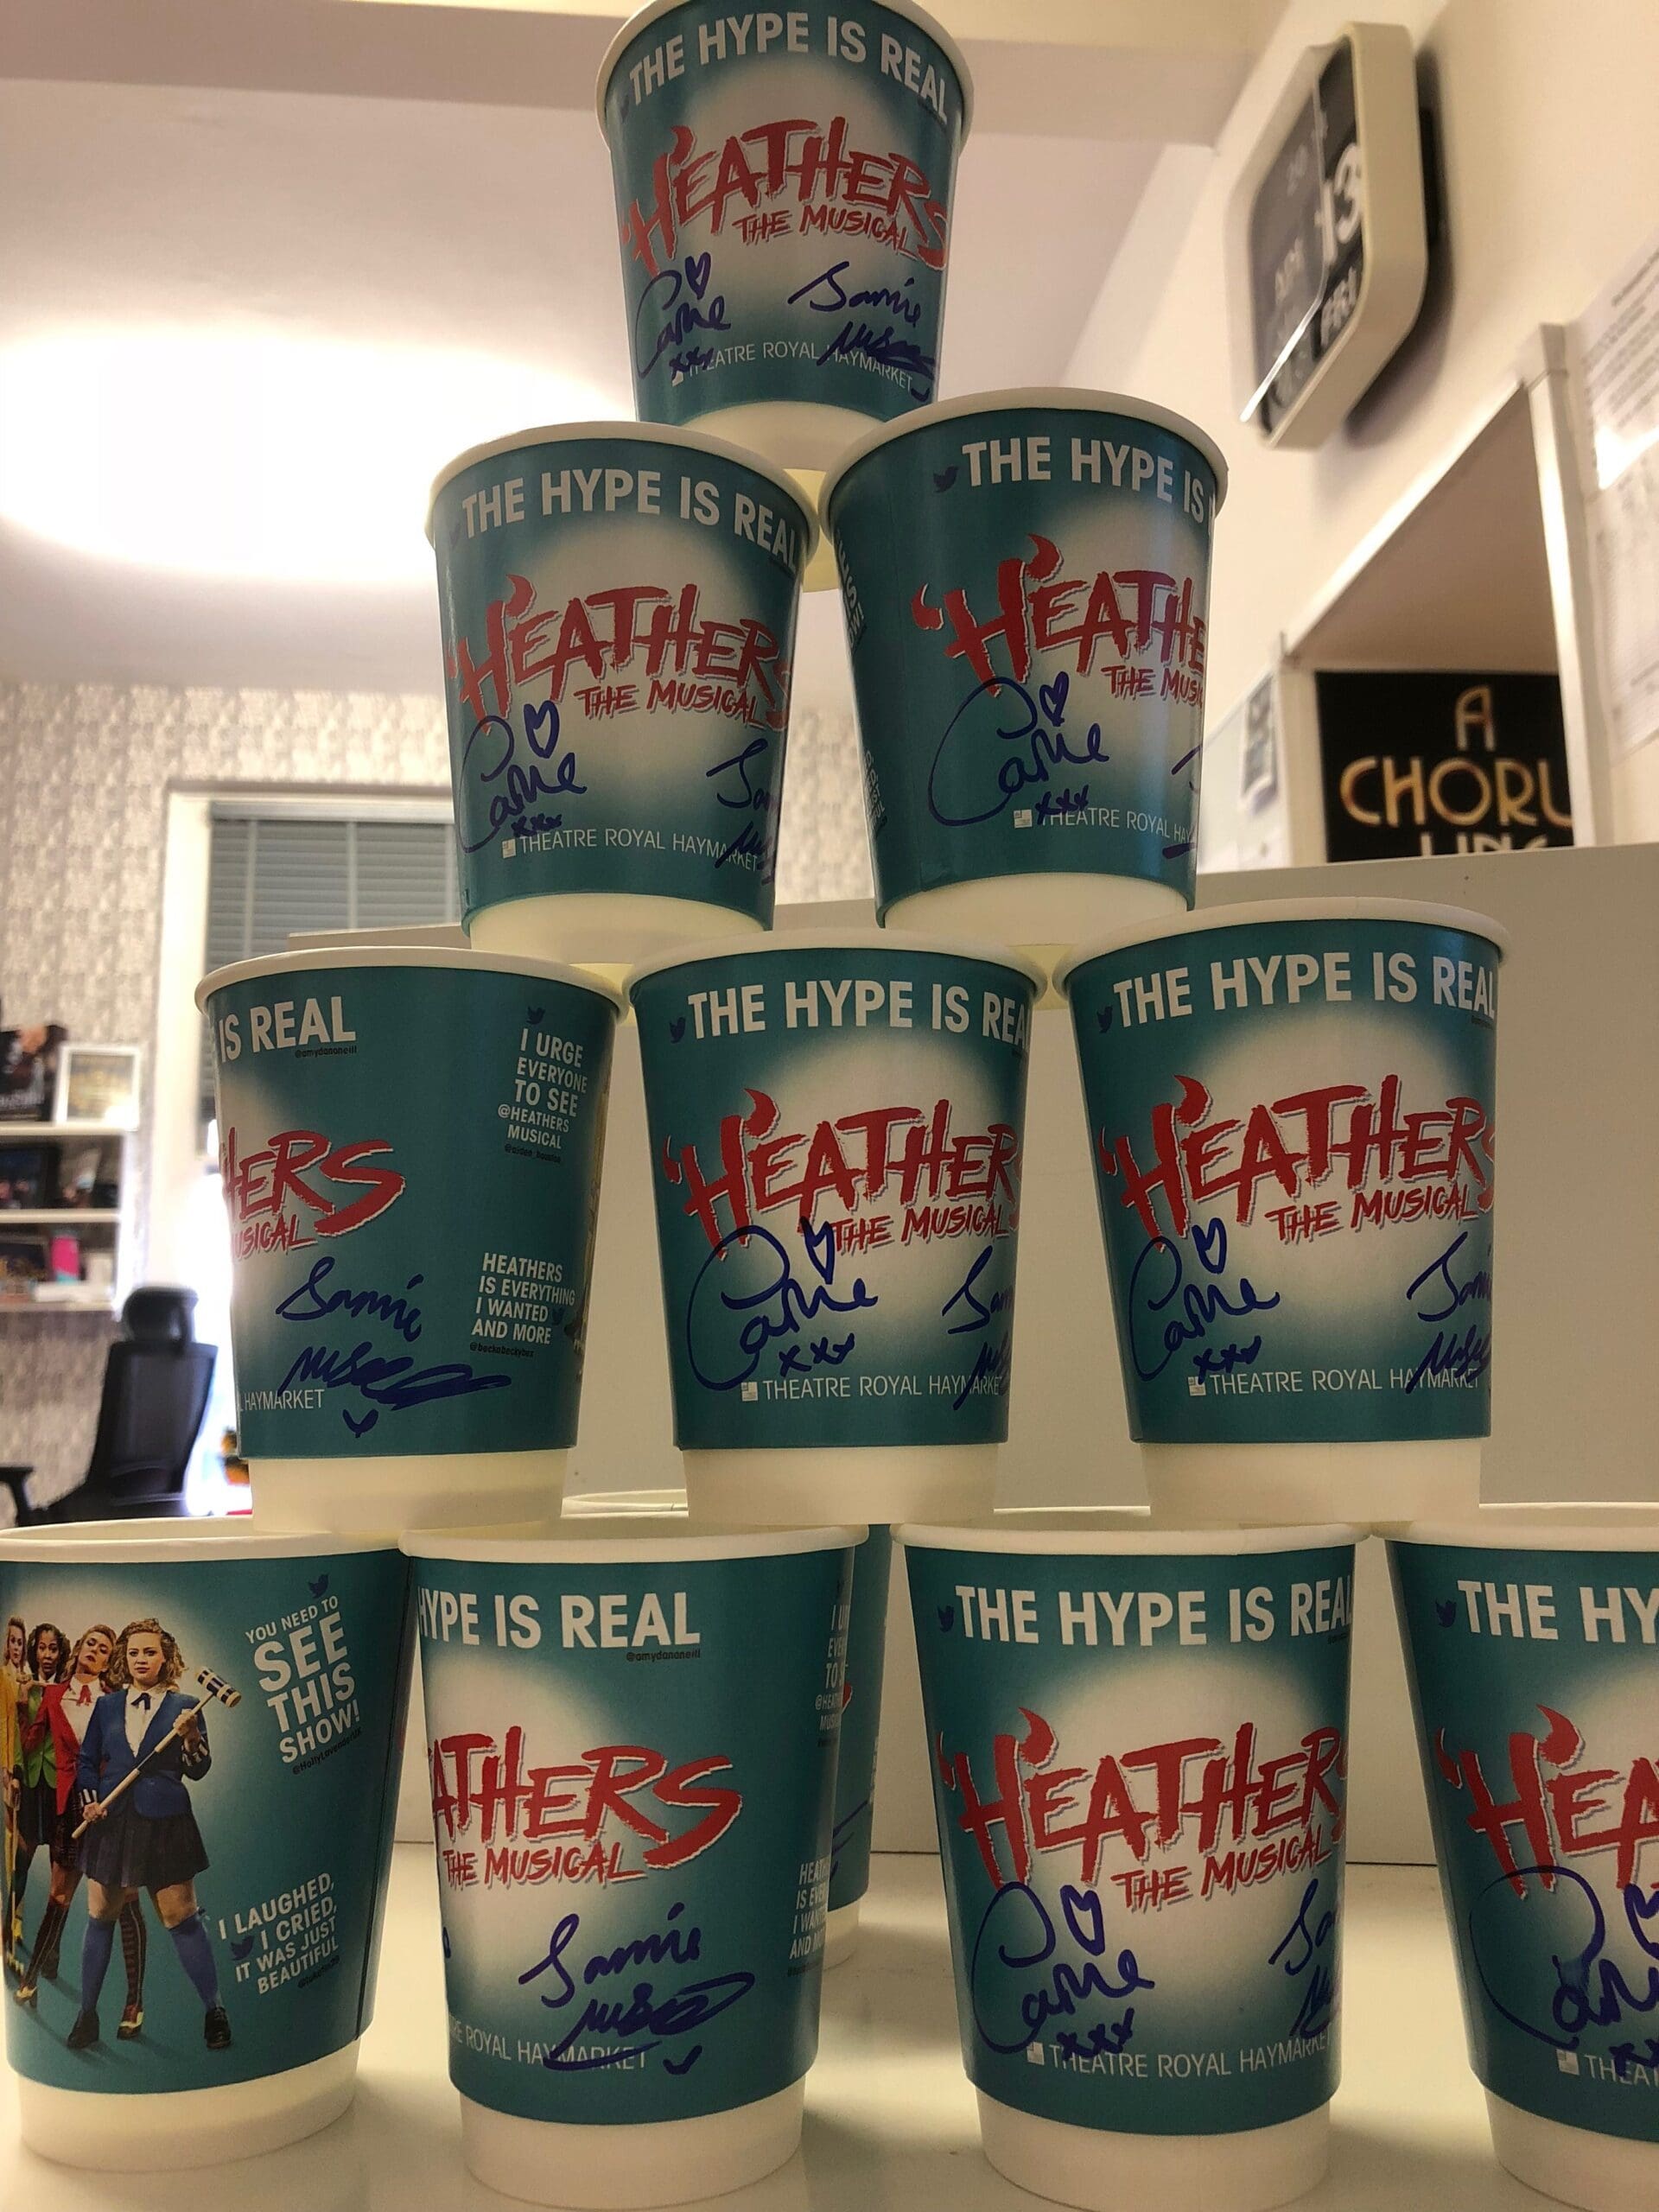 Featured image for “Enter our competition for a chance to win a Heathers cup signed by Jamie Muscato and Carrie Hope Fletcher”